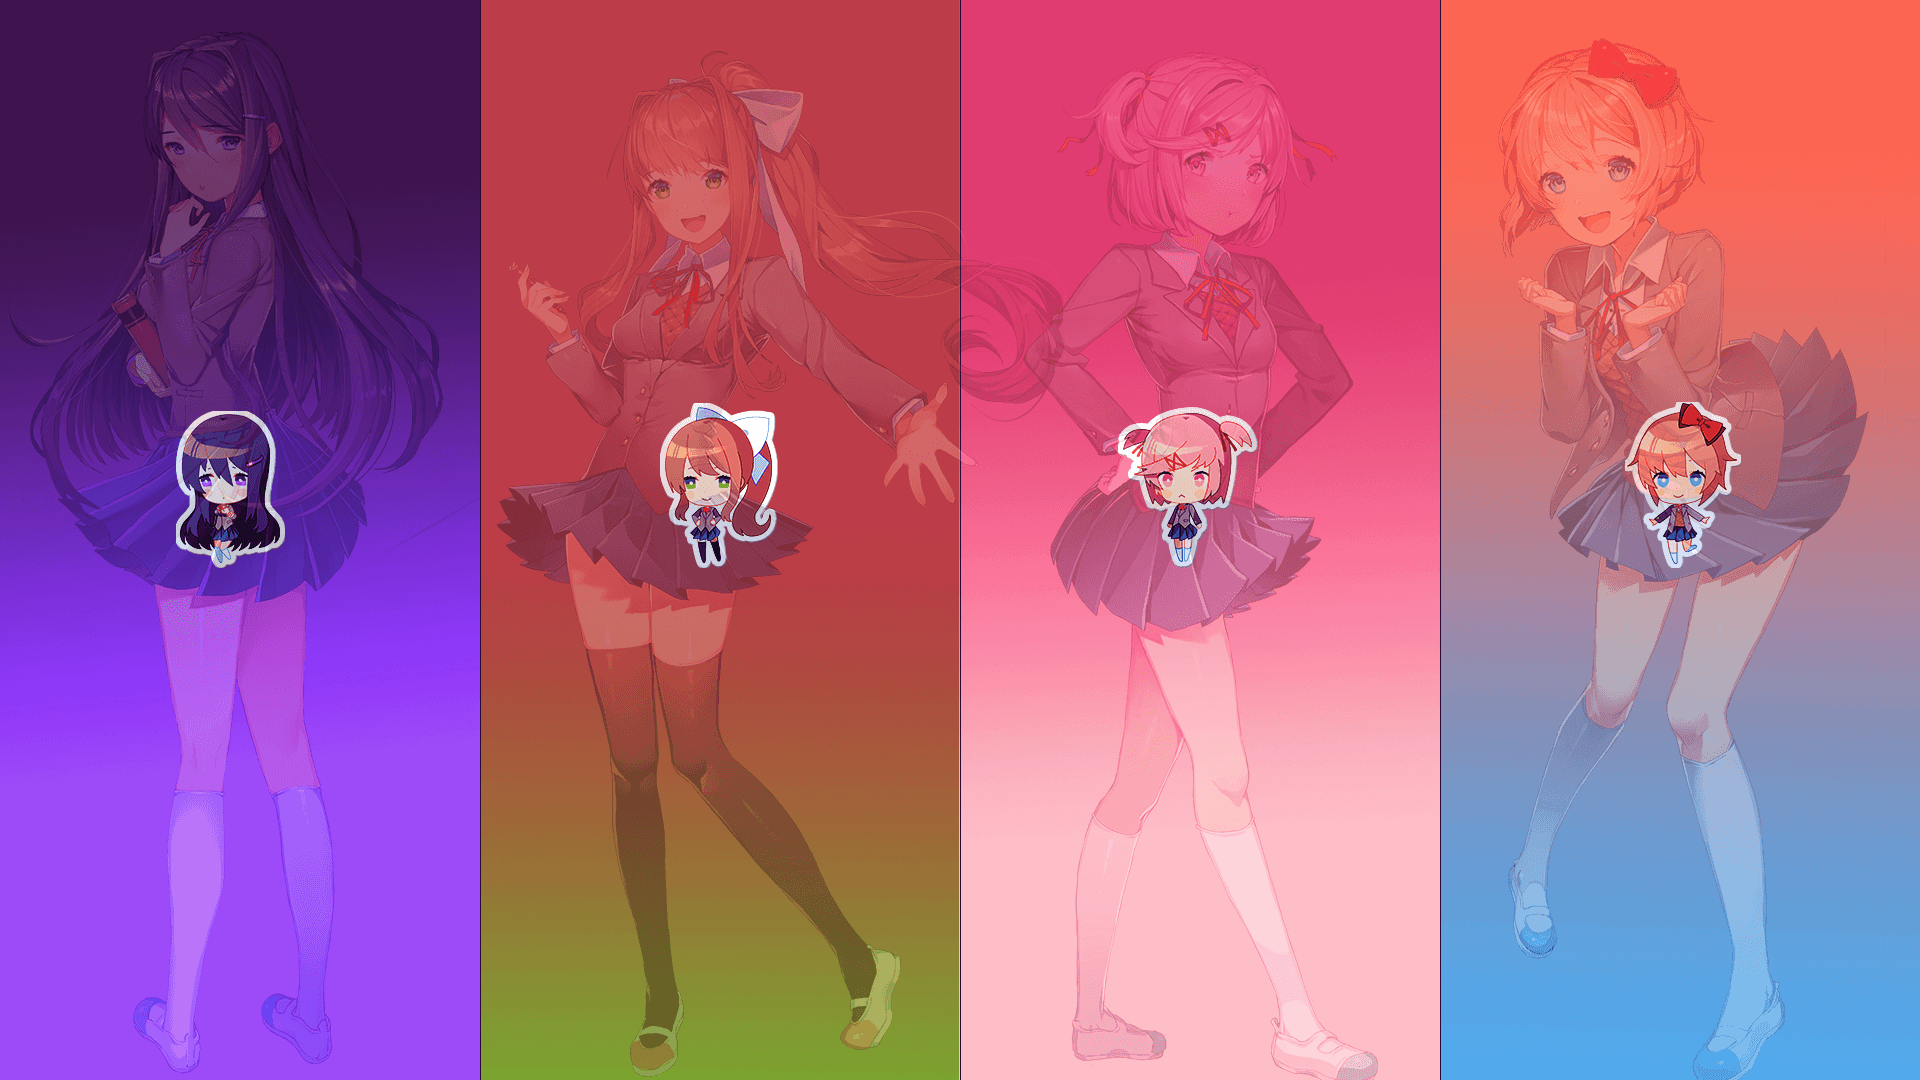 Download Doki Doki Literature Club Characters In Anime Style